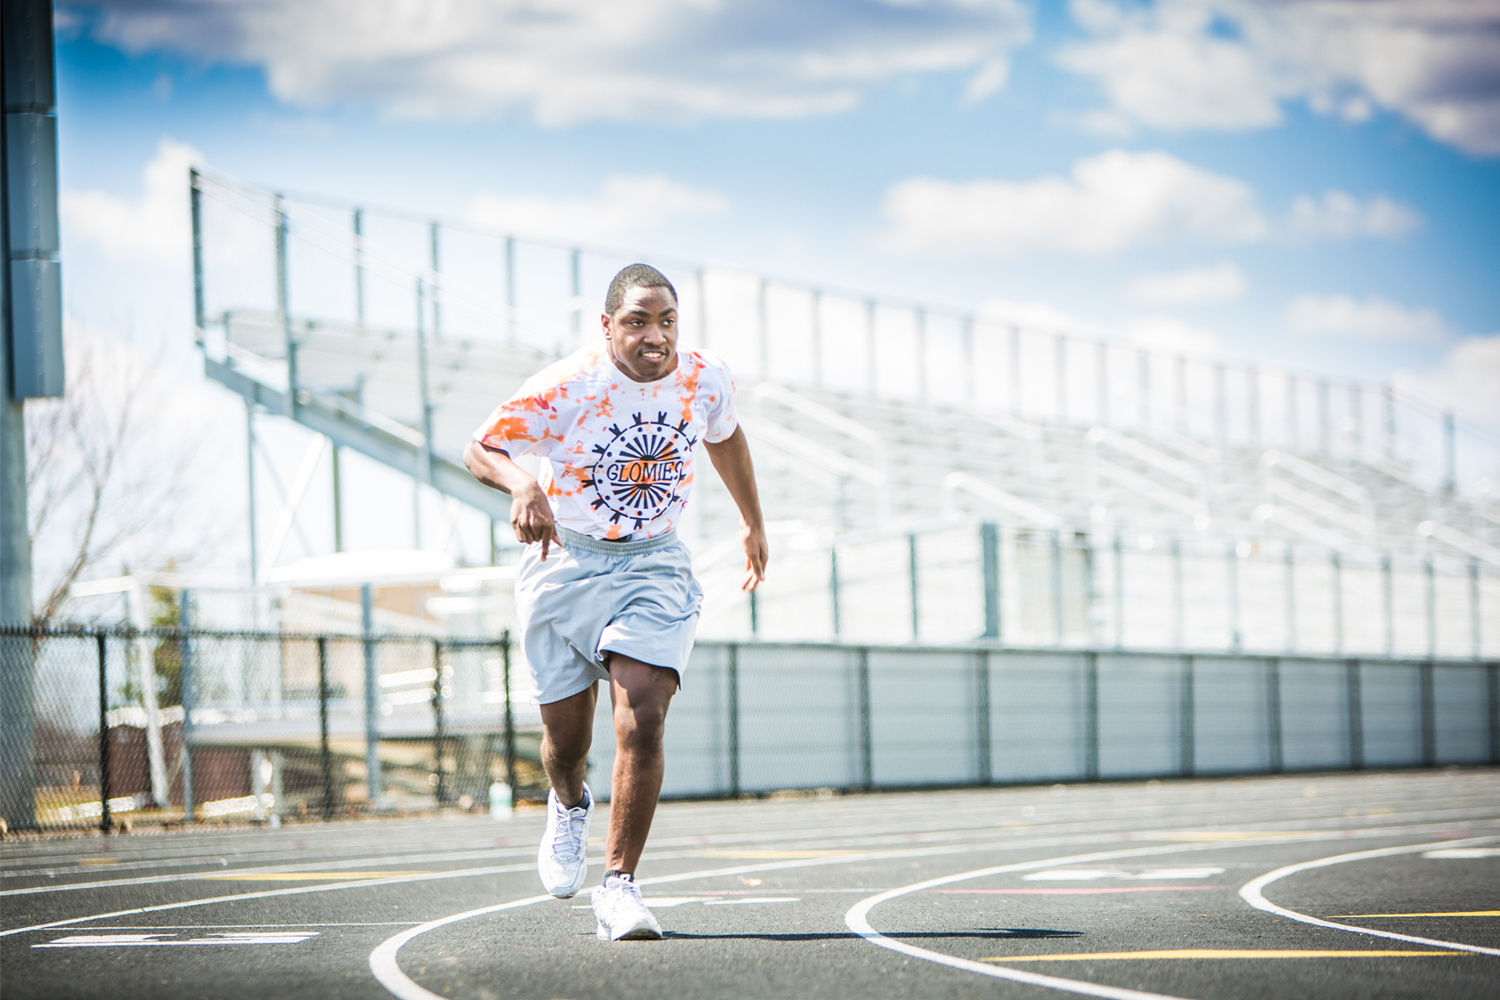 Jacob, who has cerebral palsy, has always wanted to run track.